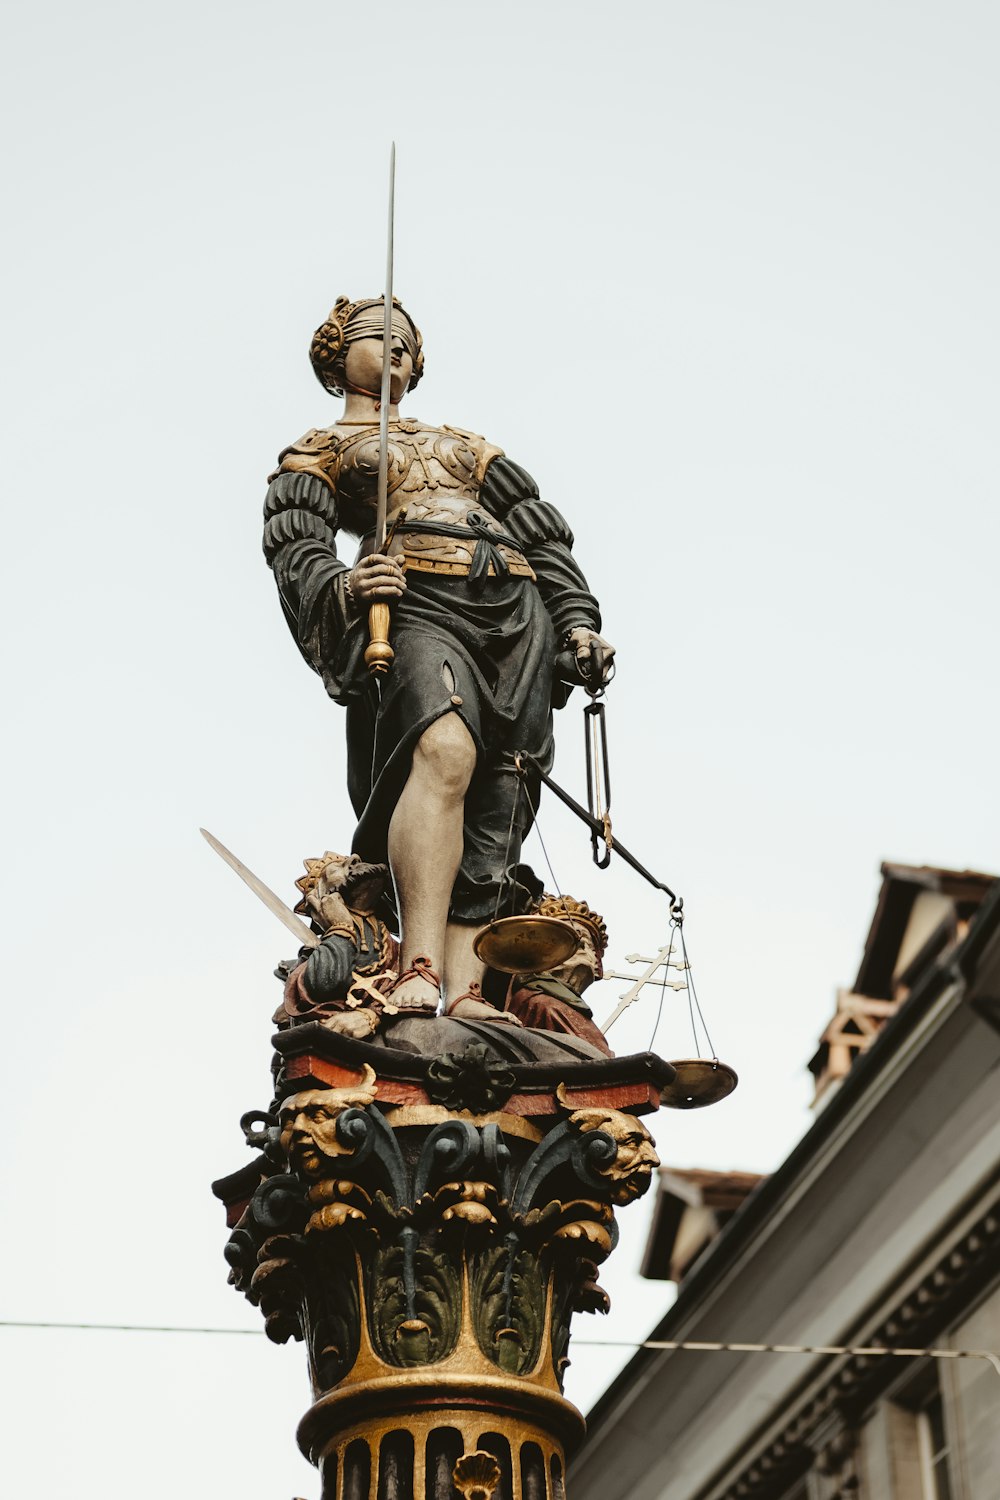 woman holding sword and balance scale statue under white sky